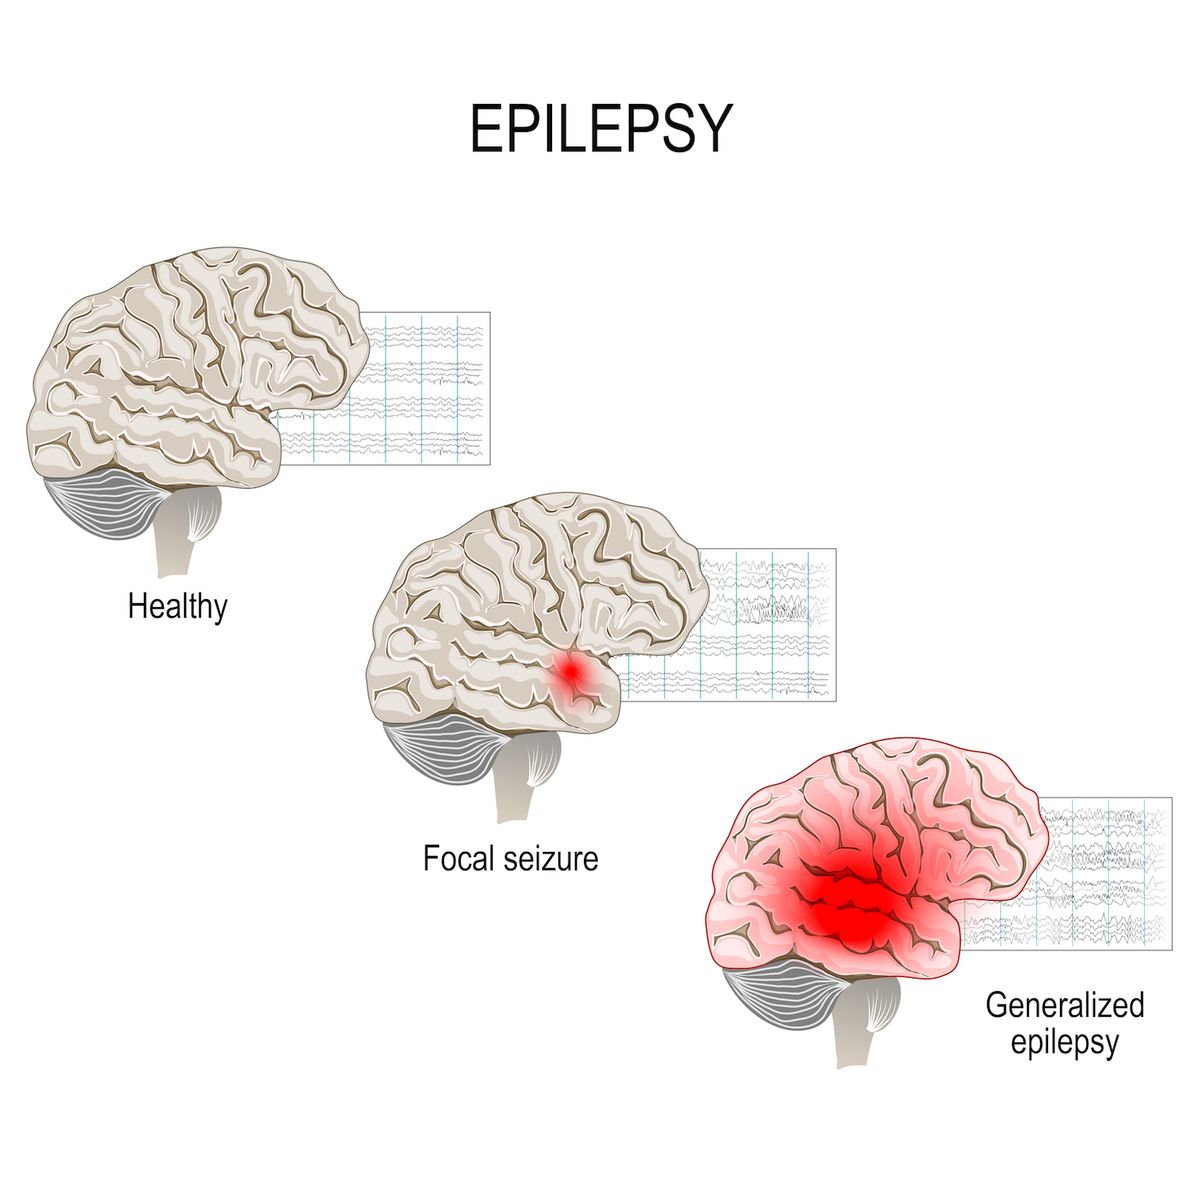 seizures-and-epilepsy-overiew-global-treatment-services-pvt-ltd